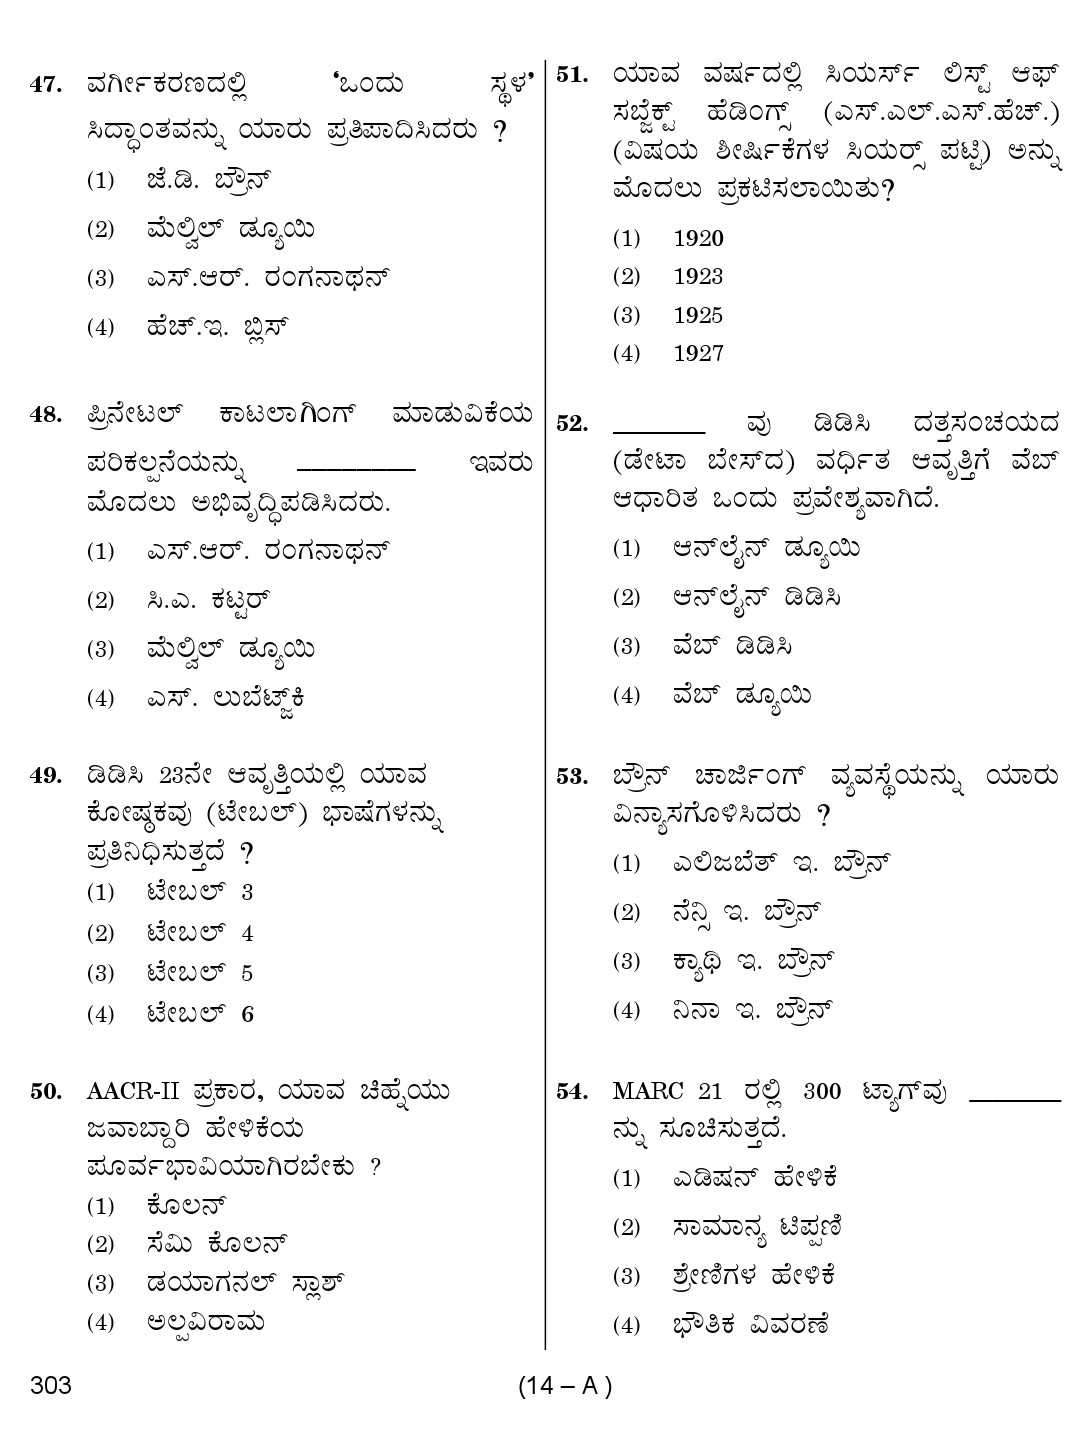 Karnataka PSC 303 Specific Paper II Librarian Exam Sample Question Paper 14